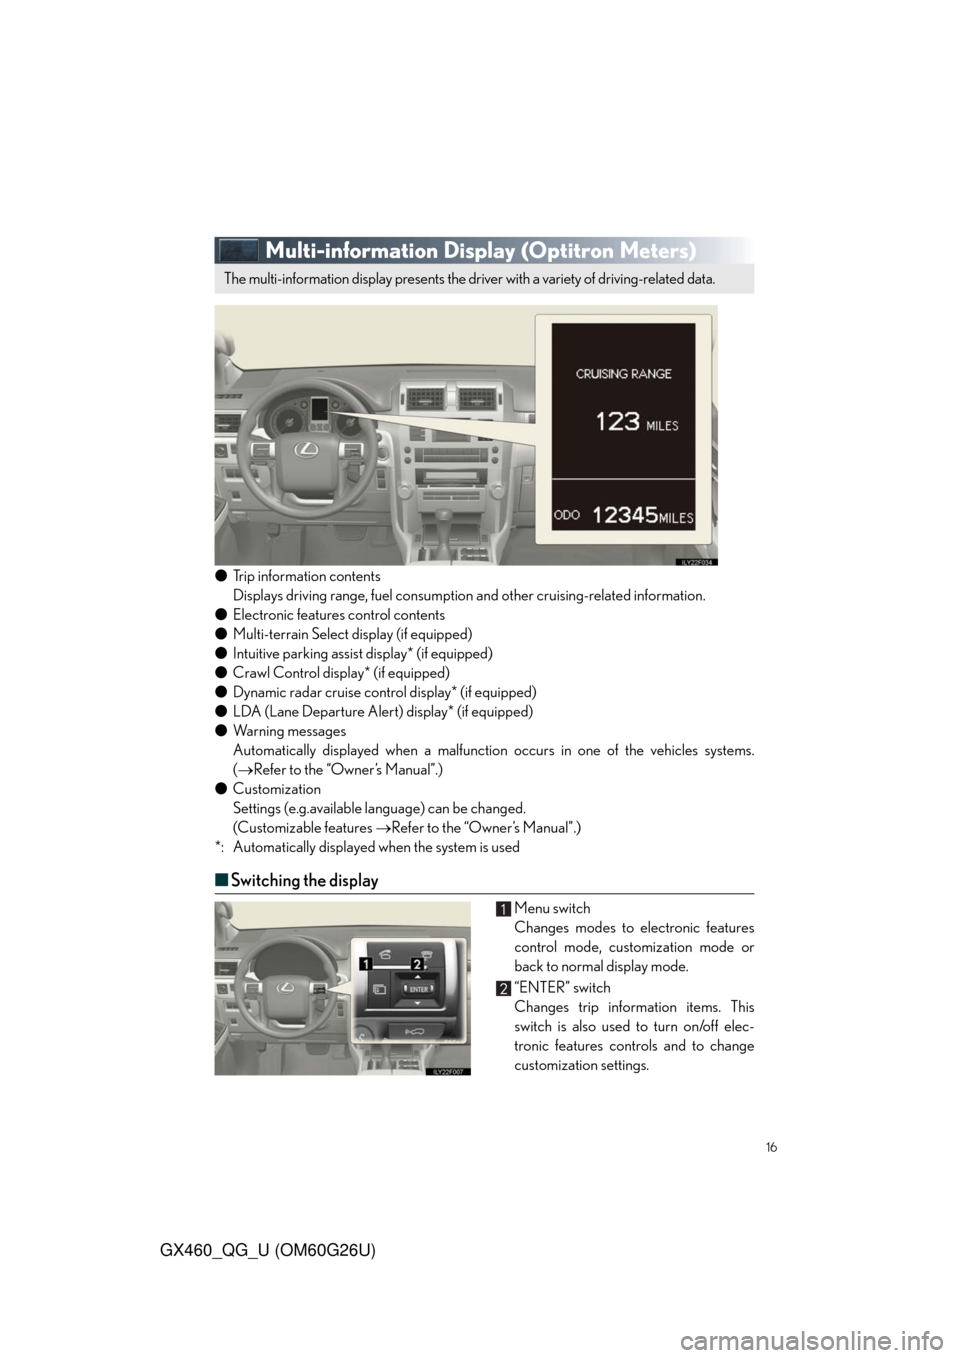 Lexus GX460 2011  Do-It-Yourself Maintenance / LEXUS 2011 GX460  QUICK GUIDE (OM60G26U) User Guide 16
GX460_QG_U (OM60G26U)
Multi-information Display (Optitron Meters)
●Trip information contents
Displays driving range, fuel consumption and other cruising-related information.
●Electronic feature